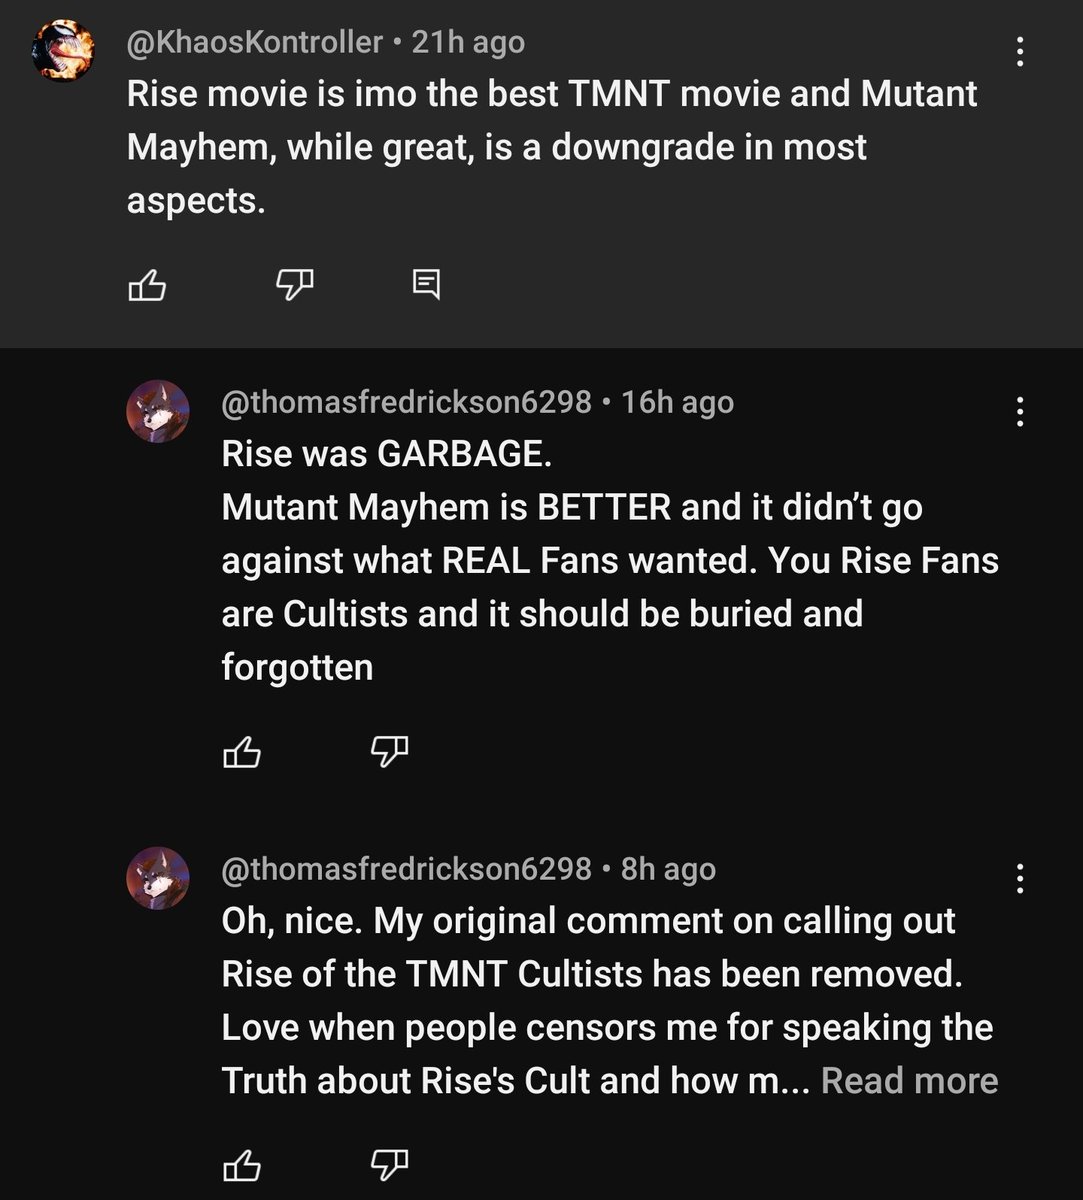 God forbid you like one TMNT movie more than the other. 
Actually delusional.